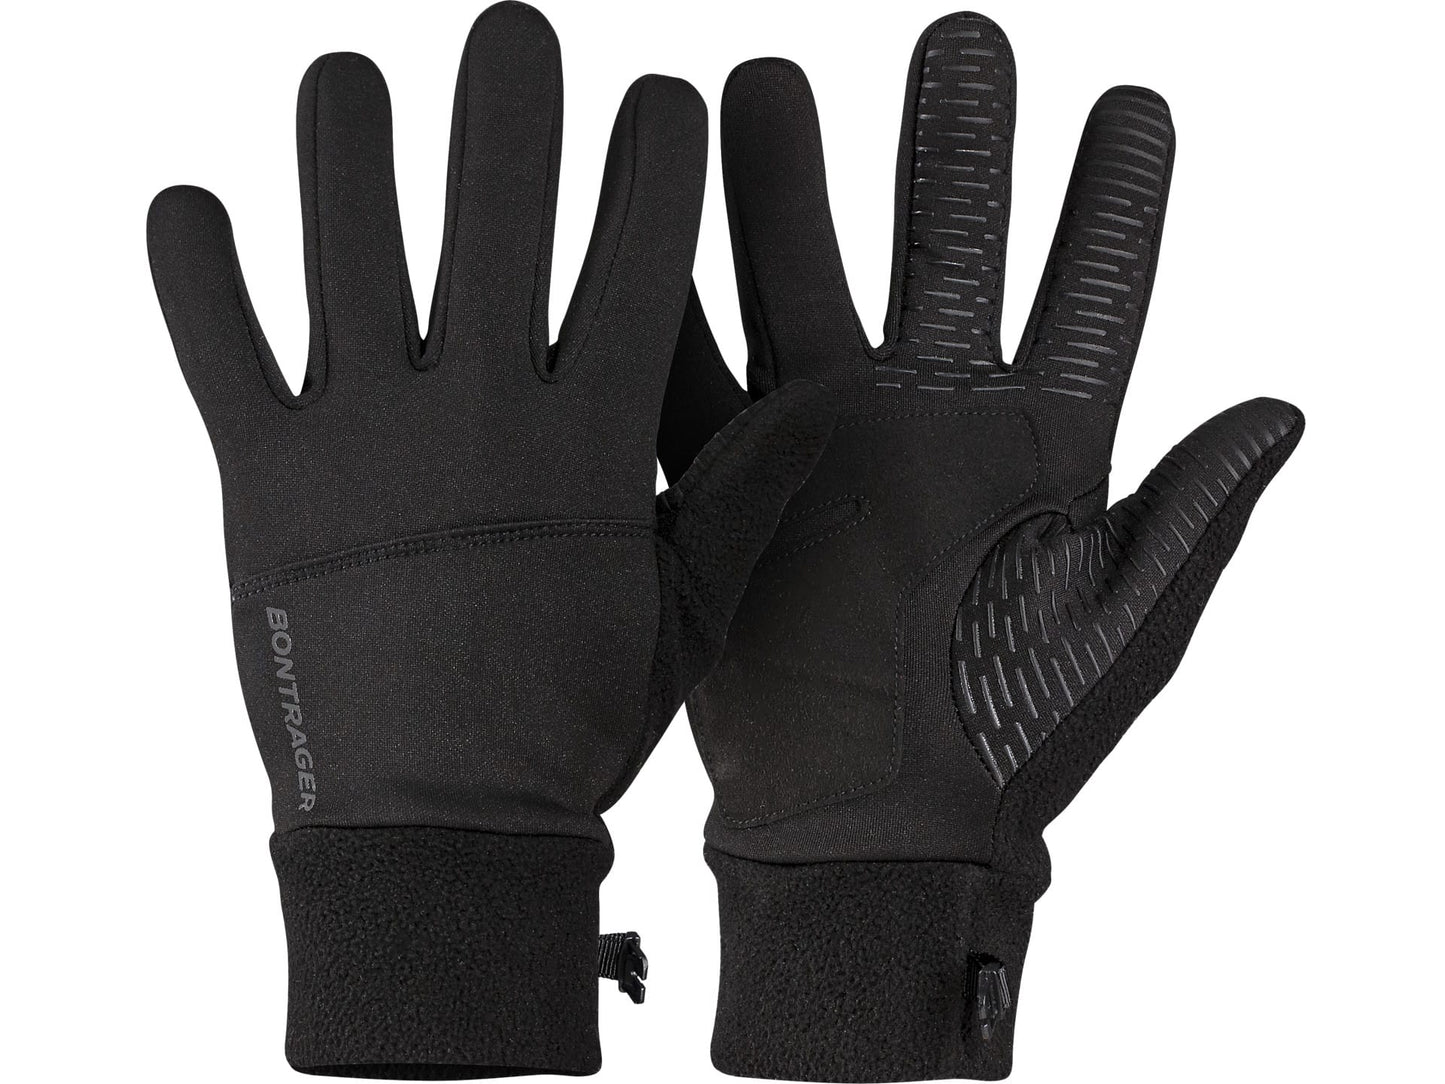 BONTRAGER CIRCUIT THERMAL CYCLING GLOVE